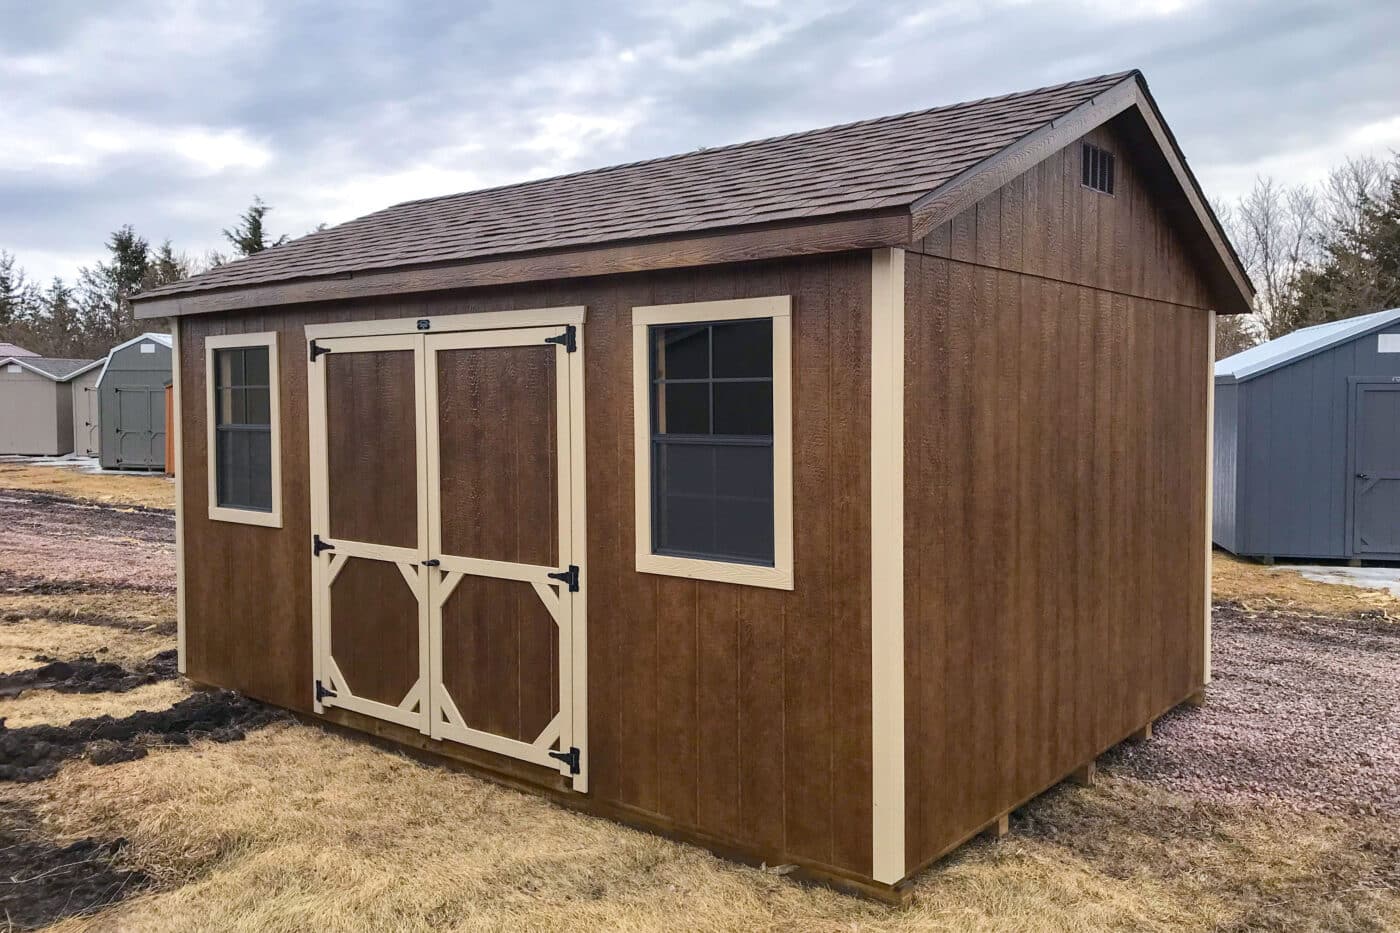 Brown and tan Ranch Prefab Shed in storage shed lot